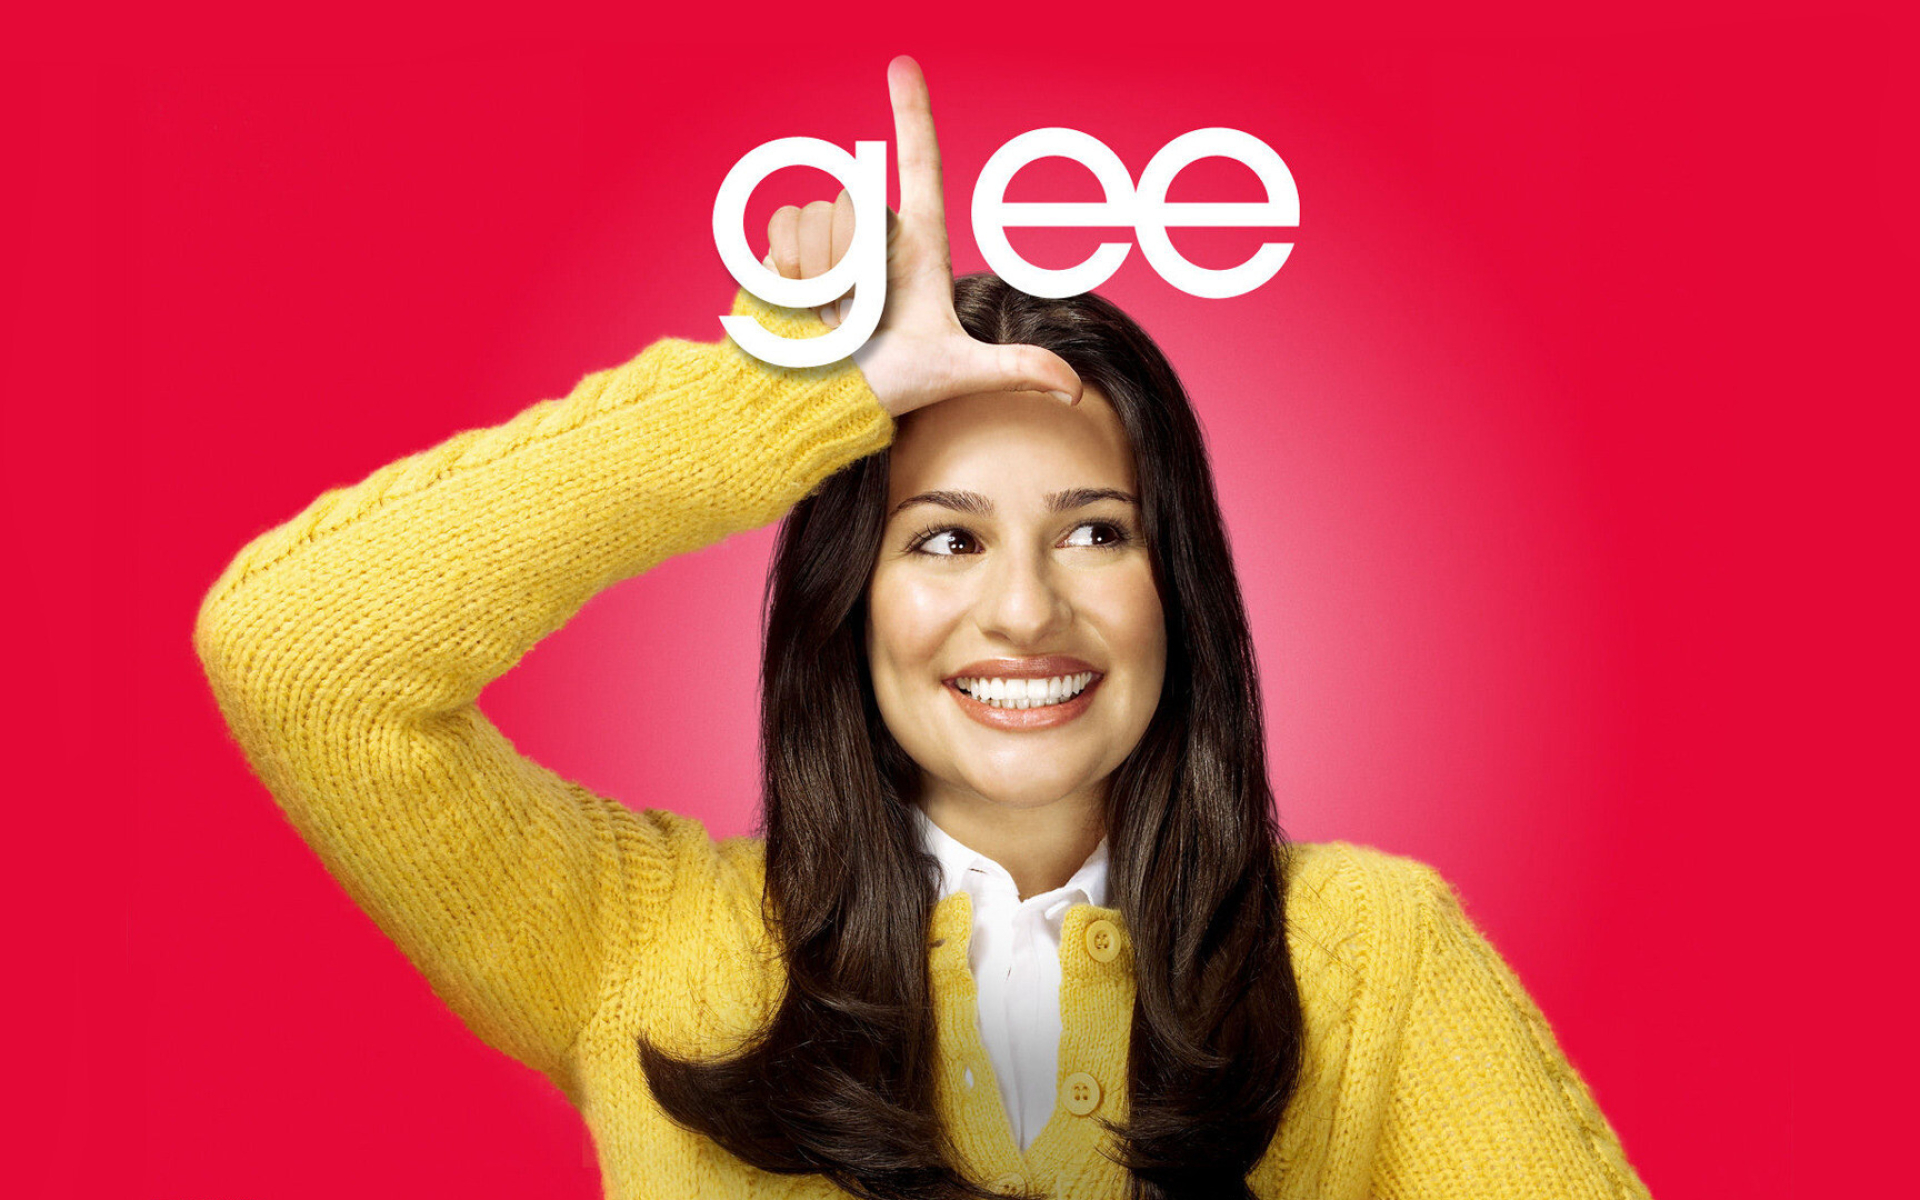 Glee (TV series): Lea Michele as Rachel Berry, A character that has an on-off relationship with Finn. 1920x1200 HD Background.